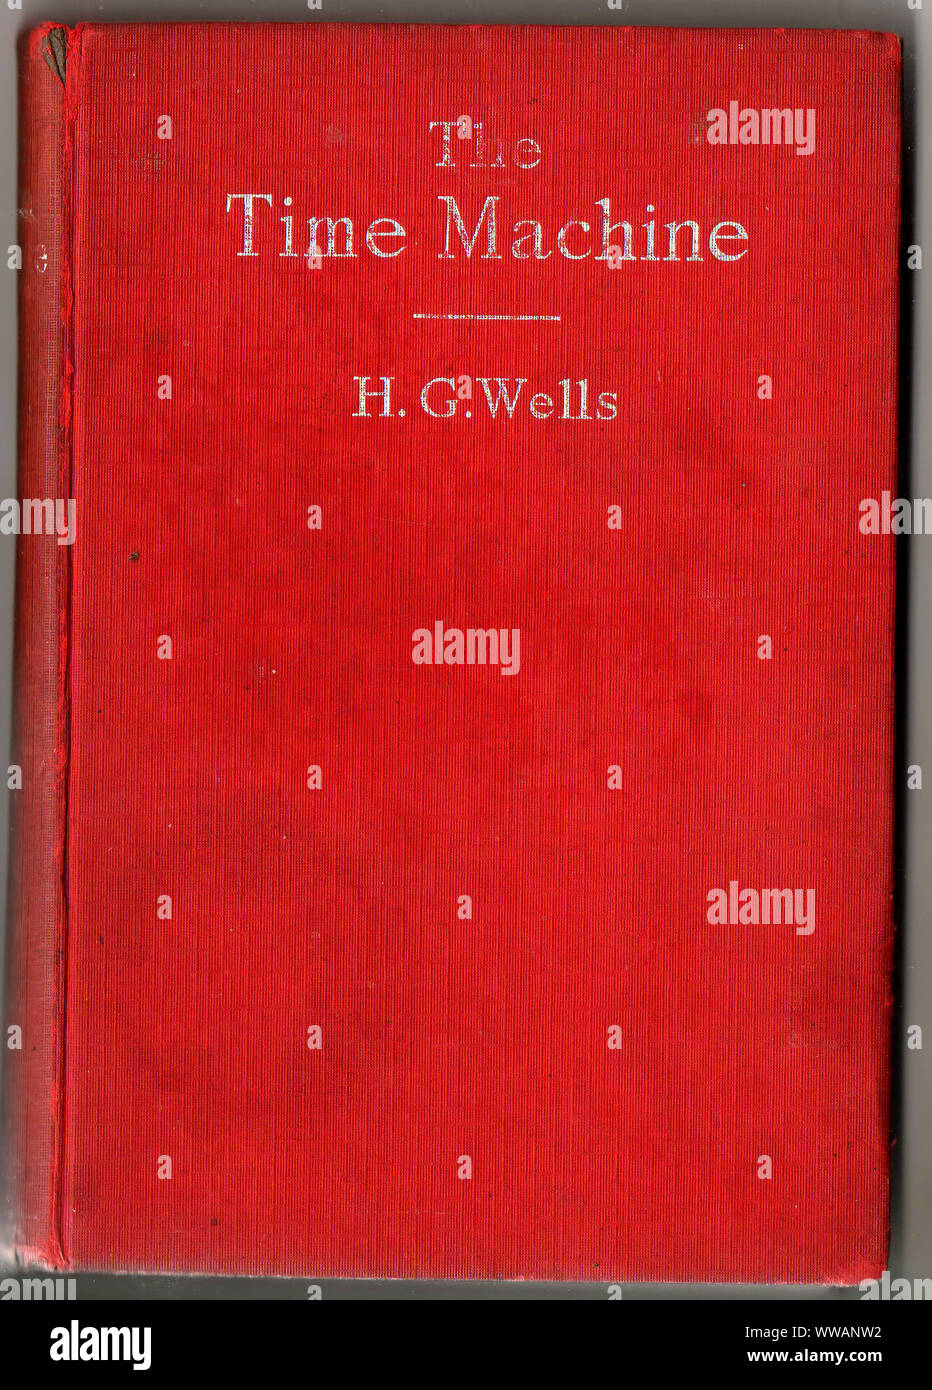 H G Wells (Herbert George Wells  1866 – 1946) ' The Time Machine' Hardback novella cover 1949 edition, published by  William Heinemann ltd. He is affectionately known as the father of science fiction Stock Photo